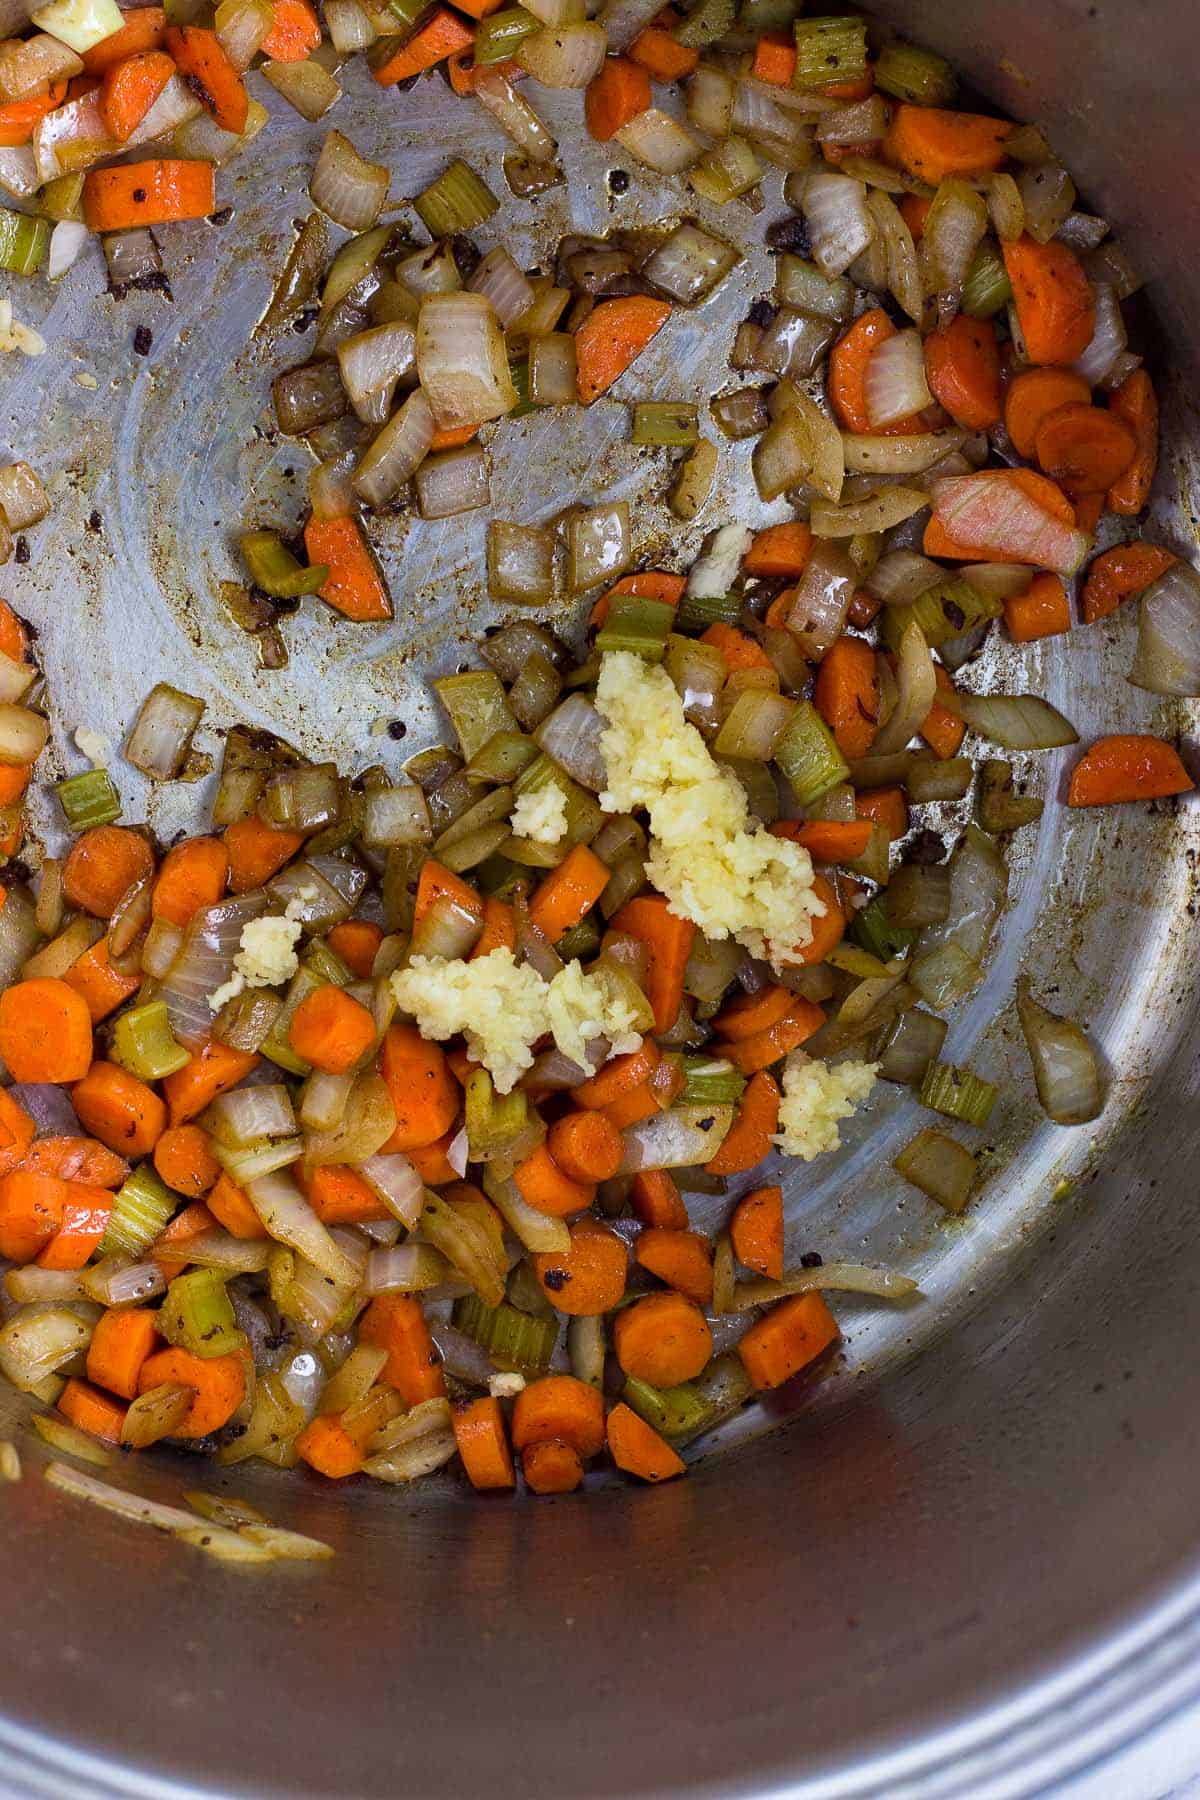 Minced garlic added to the pot with the sauteed vegetables.